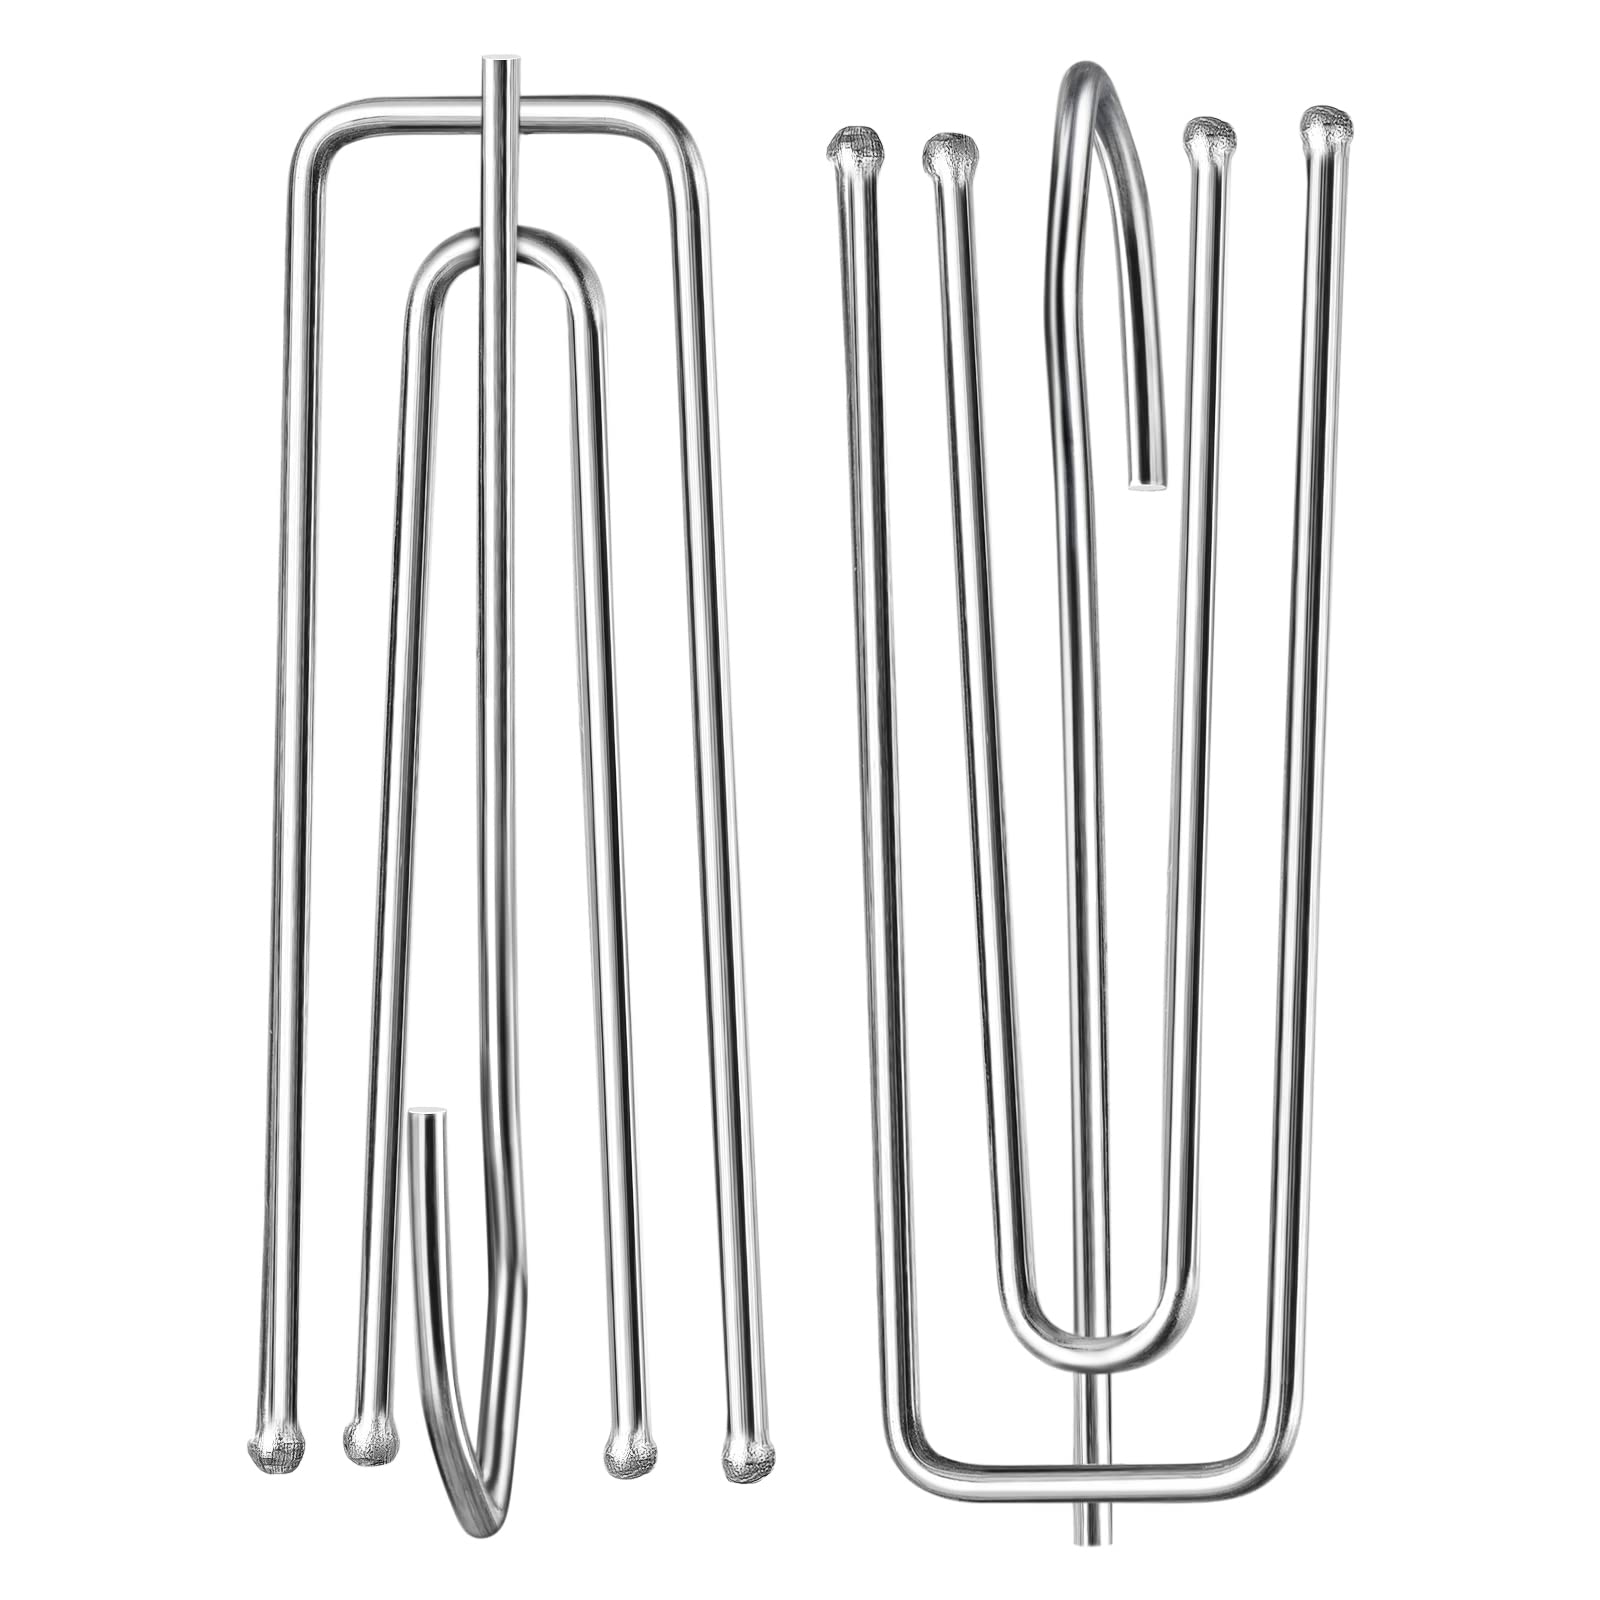 20pcs Stainless Steel Curtain 4 Prongs Pinch Pleat Hooks for Window Curtain, Shower Curtain KGORGE Store